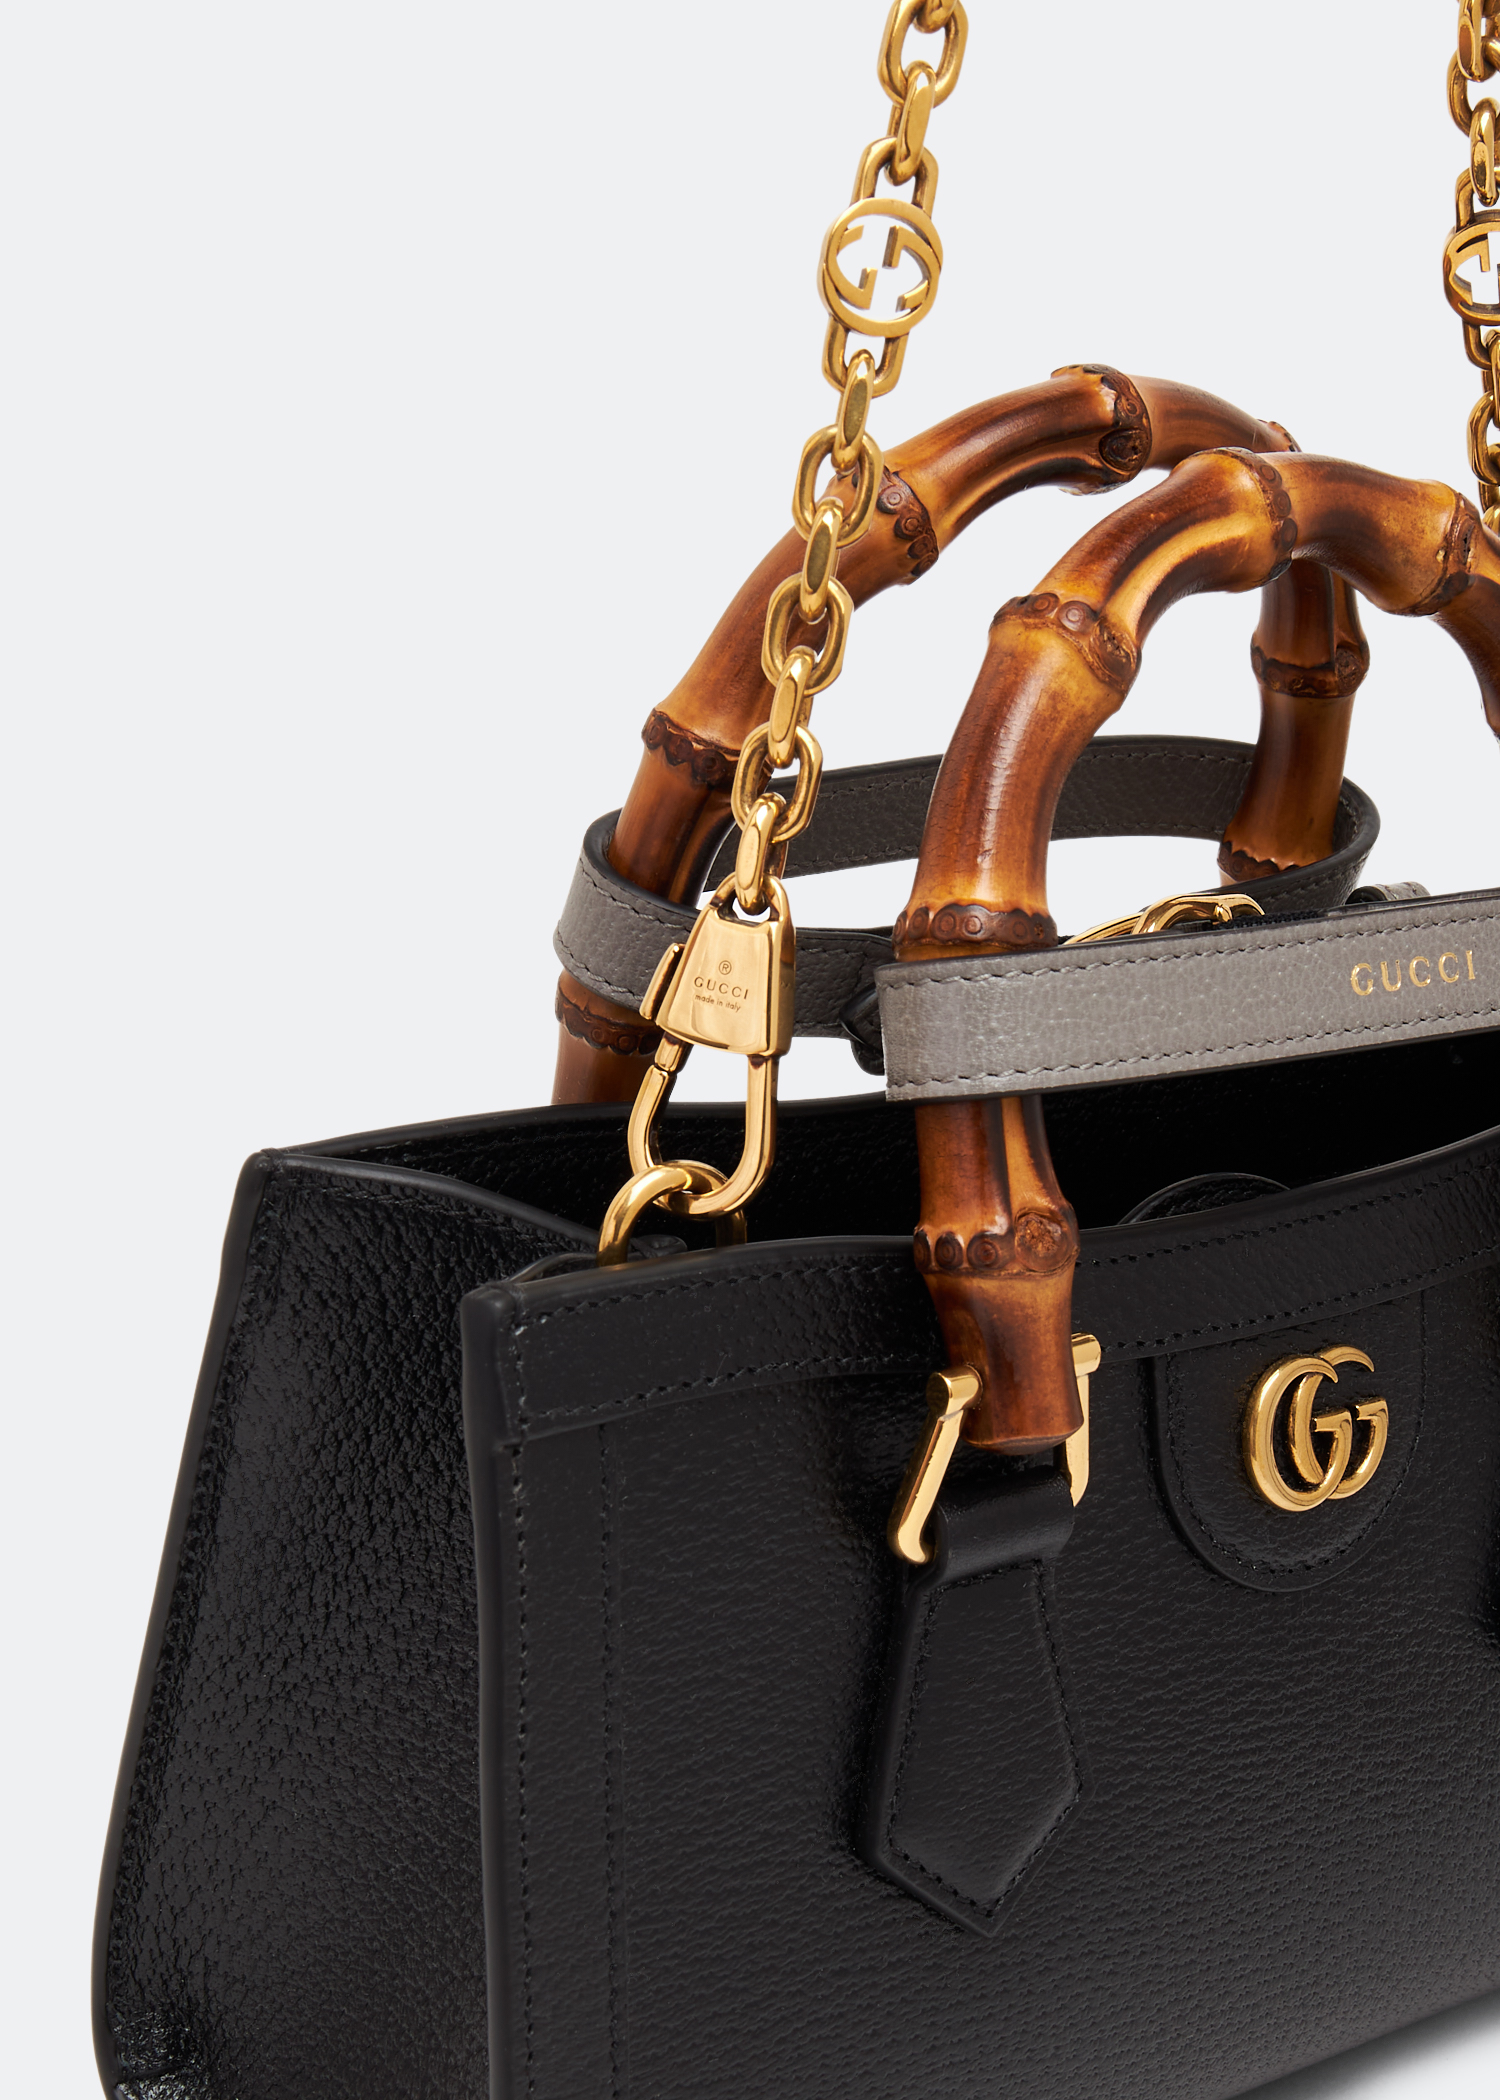 The Faithful Gucci Diana Bamboo Handle Bags Are Reimagined With A